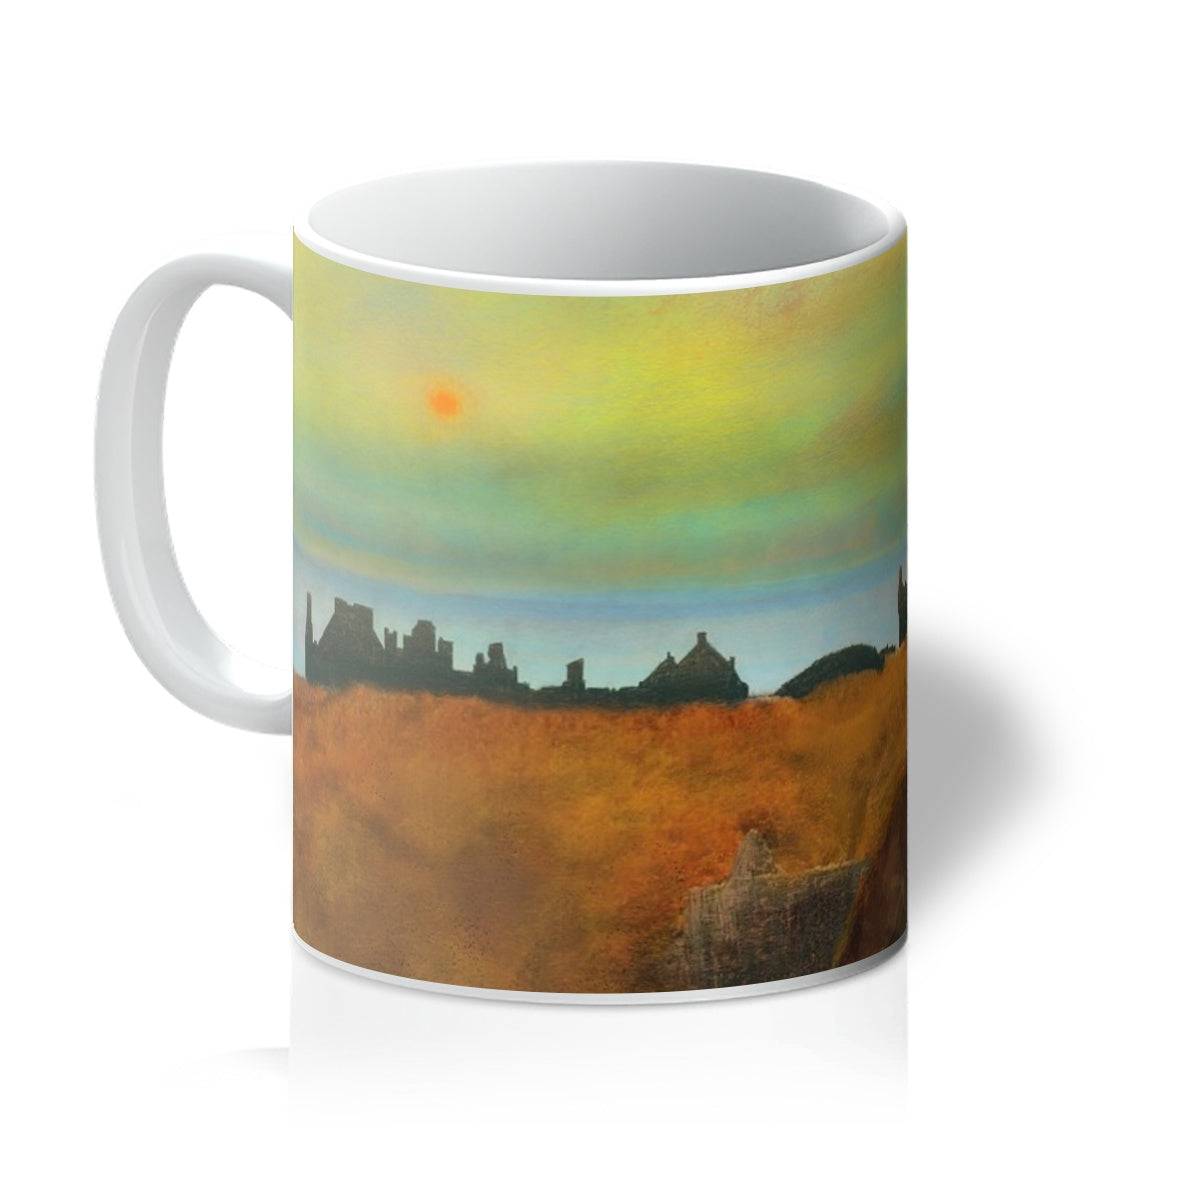 Dunnottar Castle Art Gifts Mug-Mugs-Historic & Iconic Scotland Art Gallery-11oz-White-Paintings, Prints, Homeware, Art Gifts From Scotland By Scottish Artist Kevin Hunter